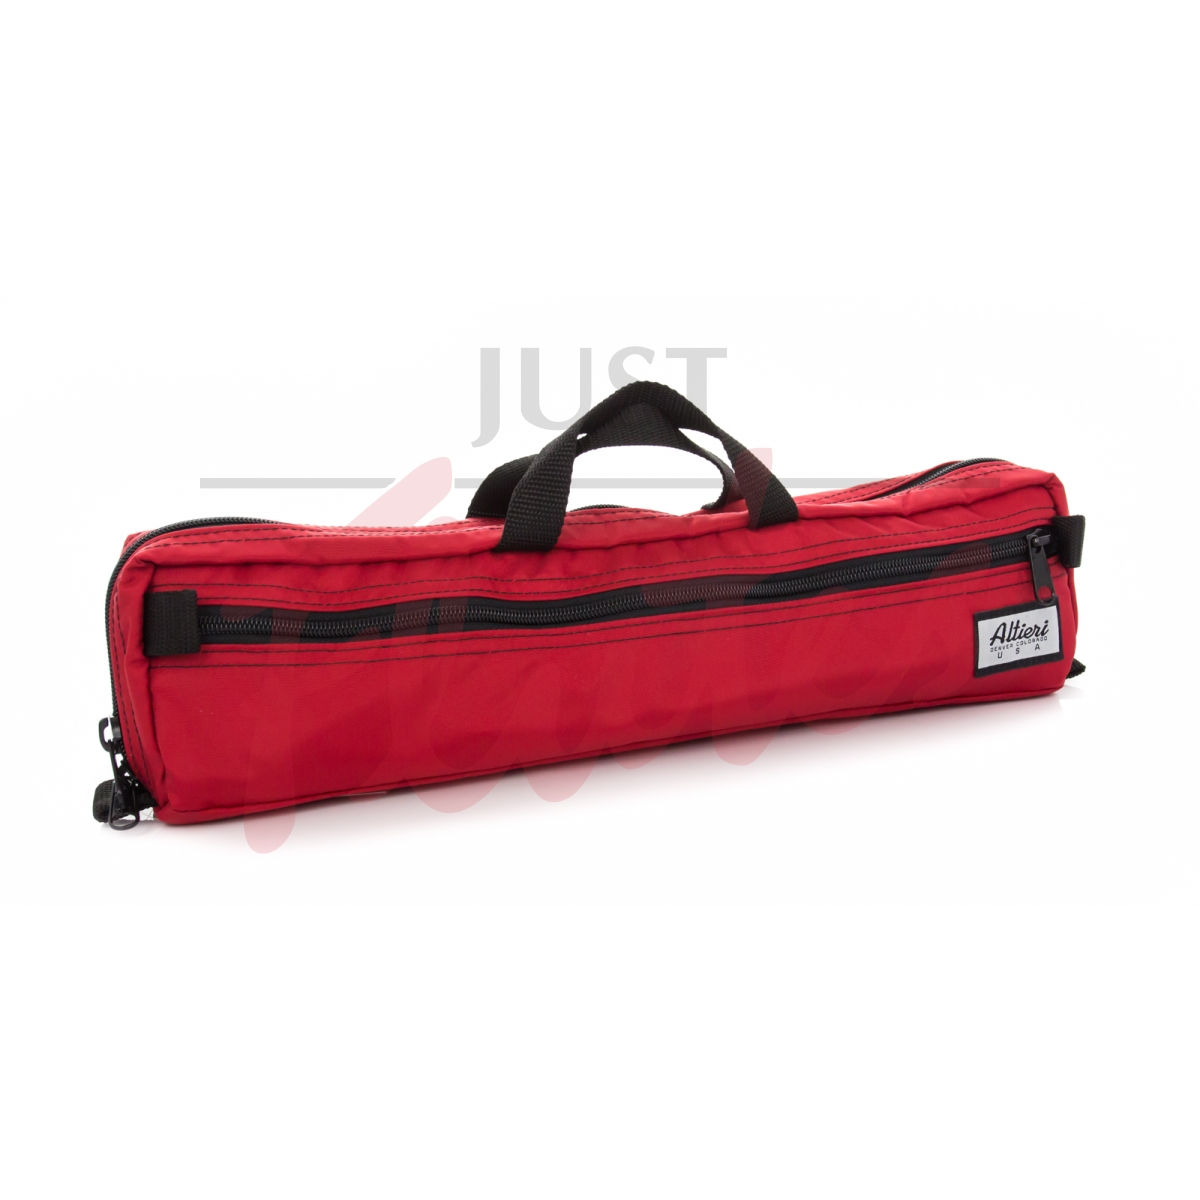 Altieri FLCC-BF-RD B-foot Flute Case Cover, Red